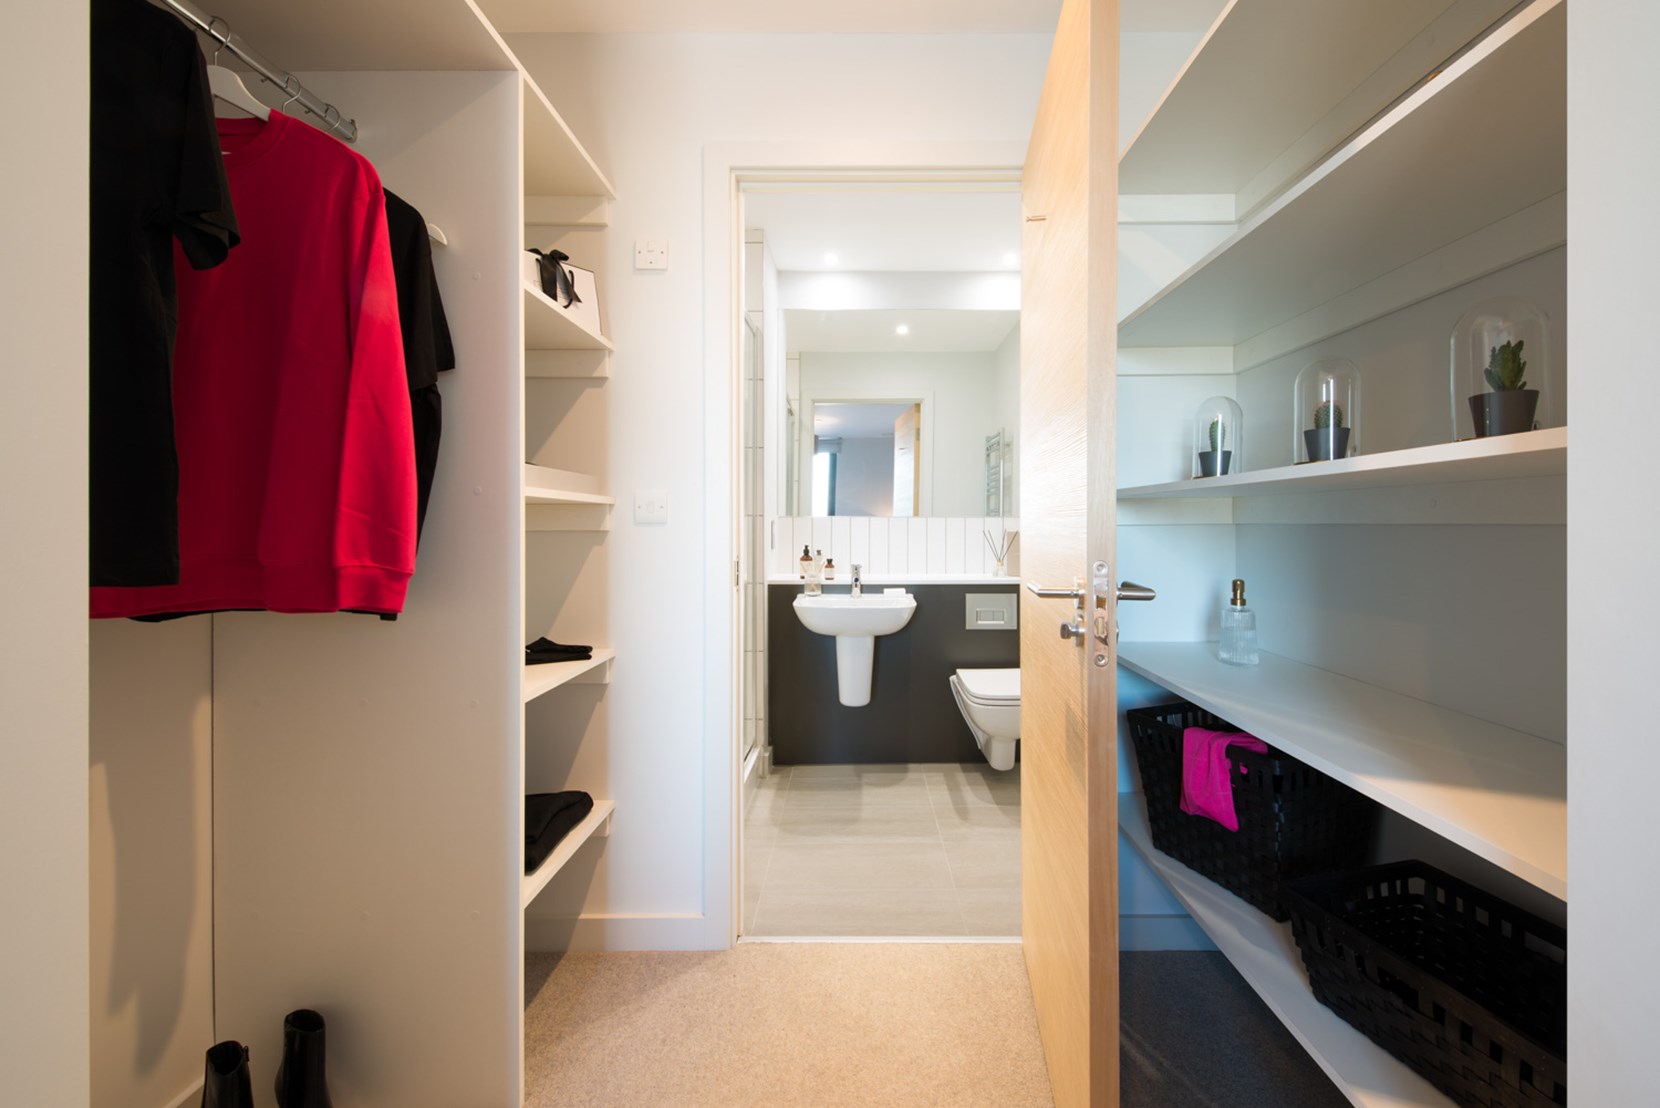 Apartments to Rent by JLL at Duet, Salford, M50, dressing room